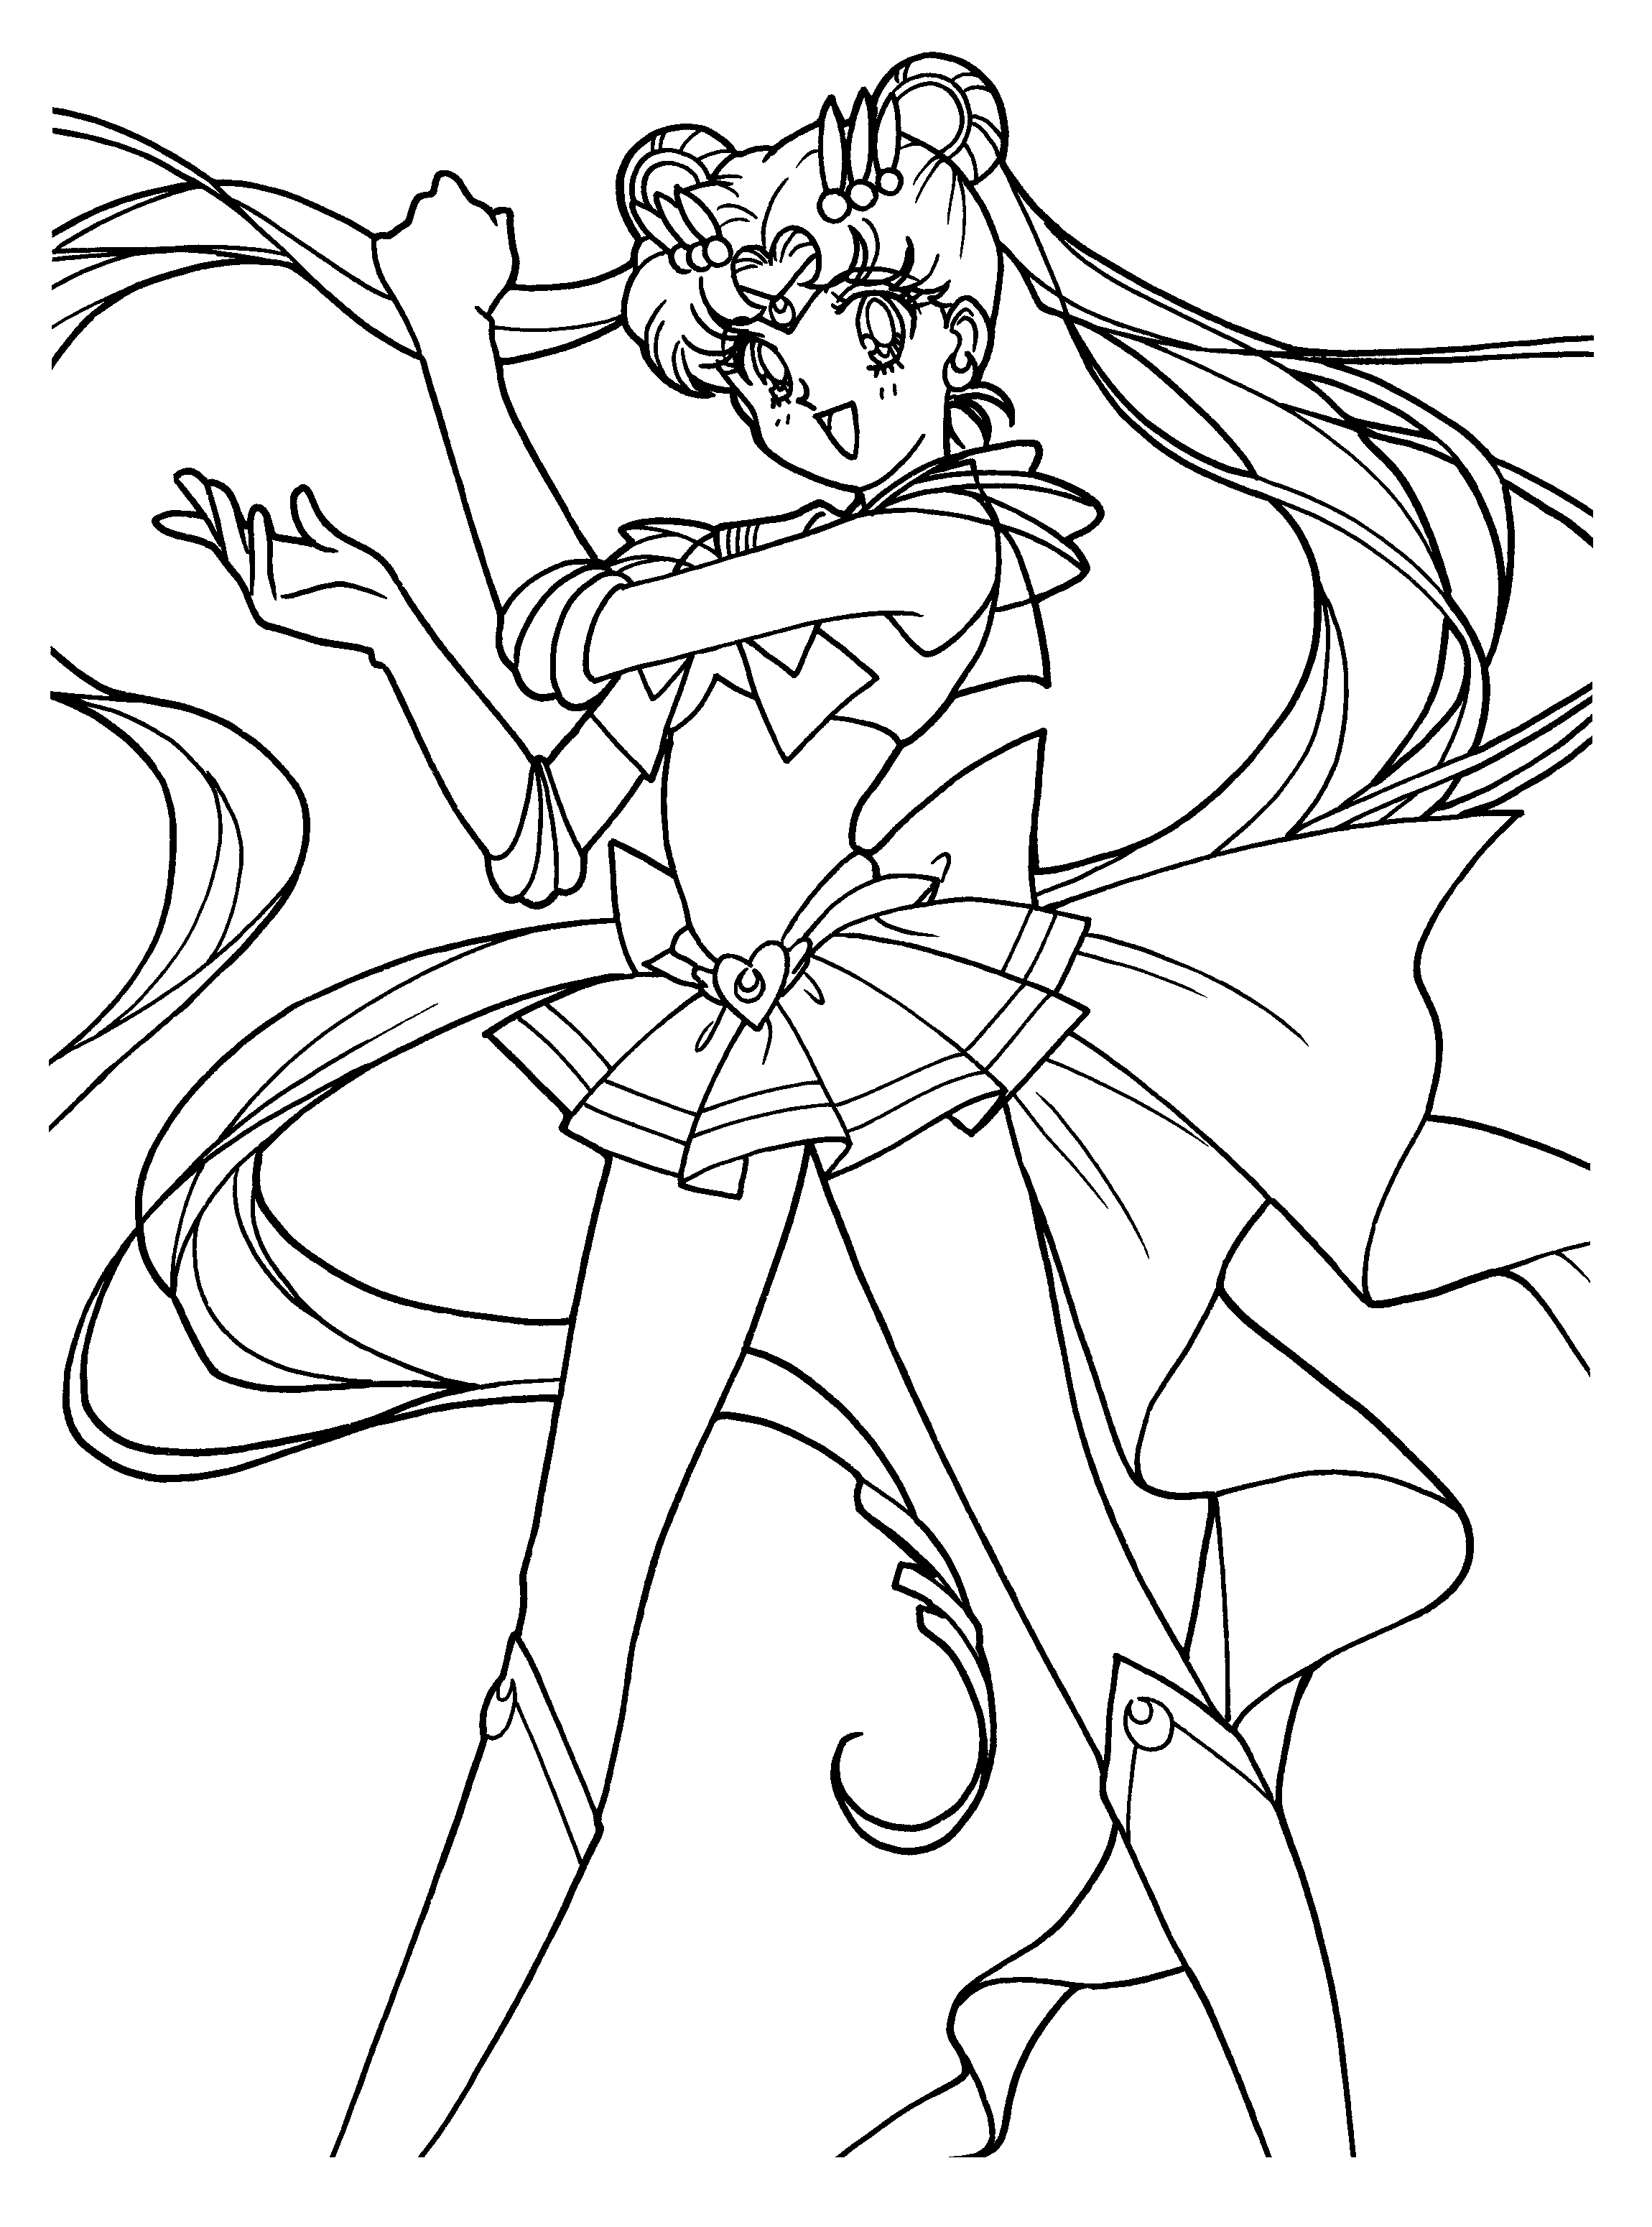 Sailor Moon Black and White Logo - Coloring Pages Sailor Moon GIFs - PngGif